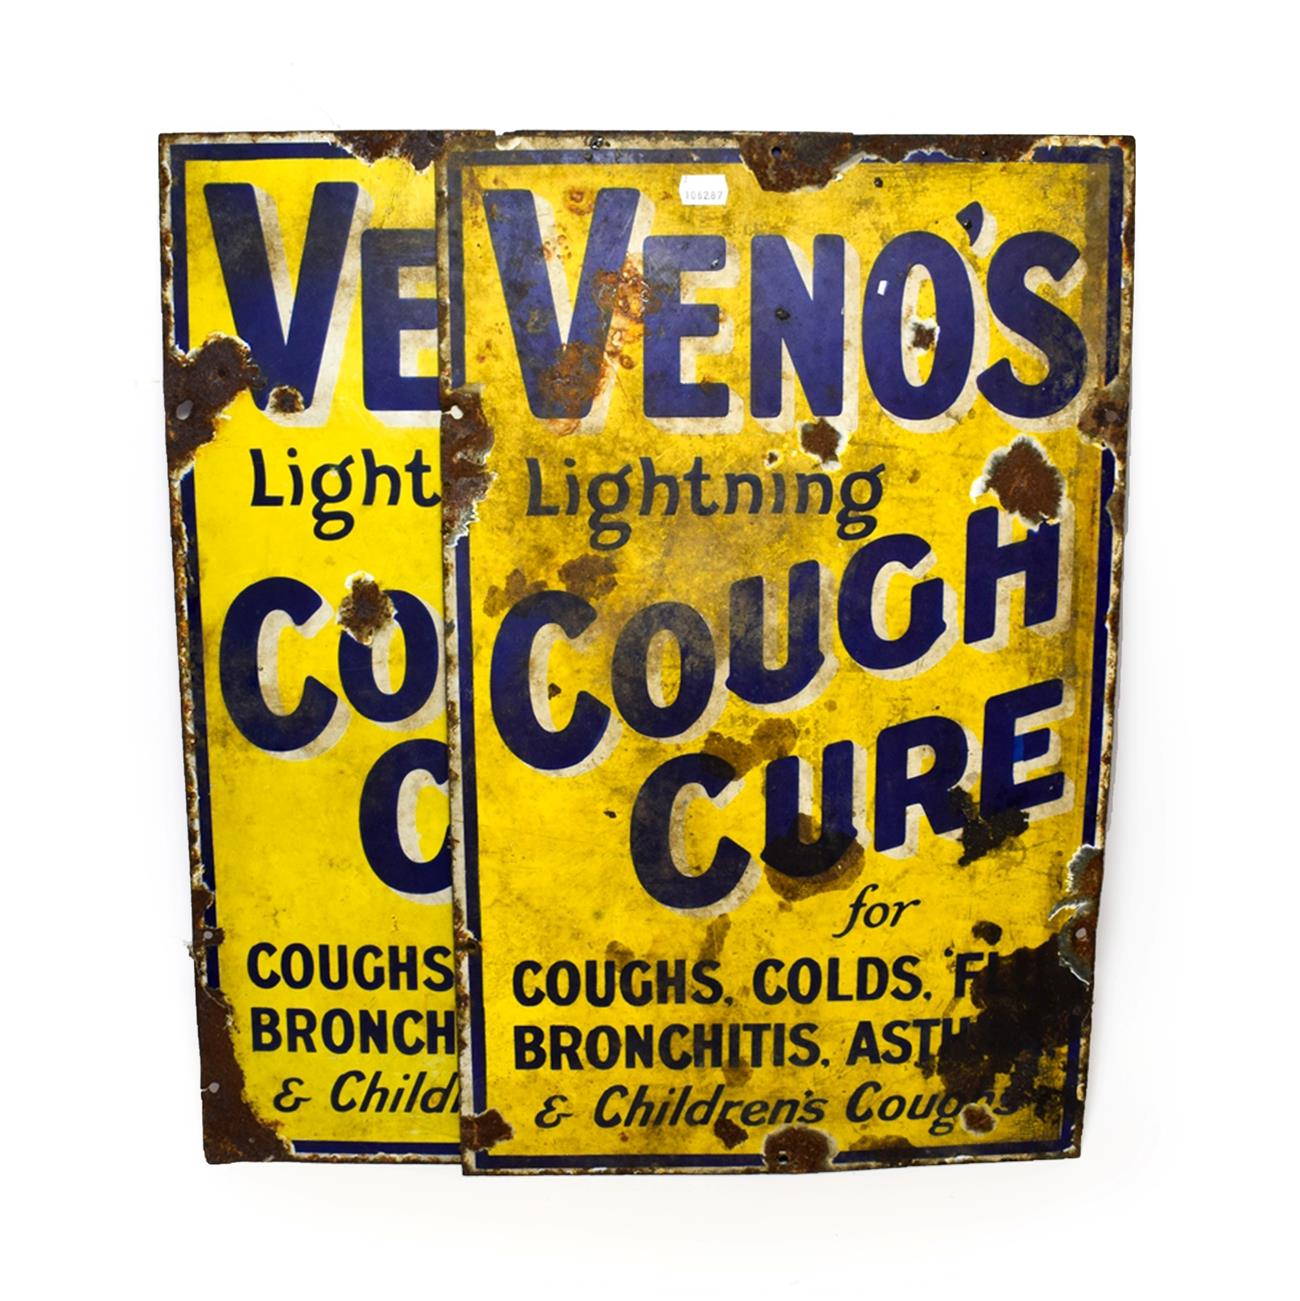 Lot 3043 - Venos Lightning Cough Cure Enamel Advertising Signs blue lettering on yellow ground (both F)...